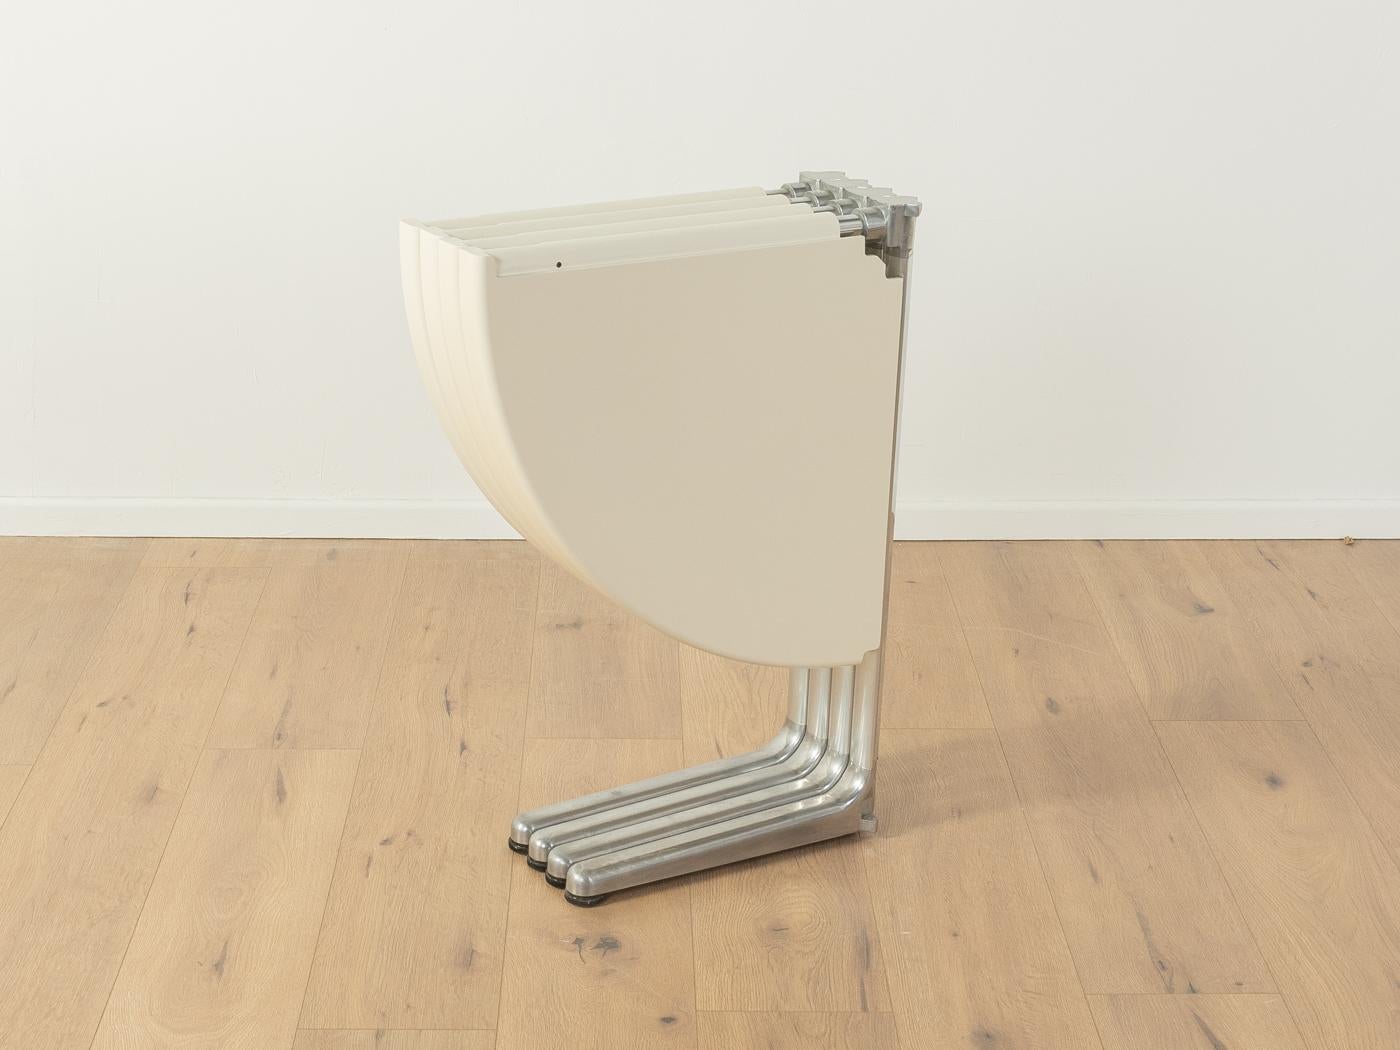 
Article Details
Award-winning folding table, model PLANO, by Giancarlo Piretti for Anonima Castelli from 1971. High-quality frame made of stainless steel and cast aluminium with a four-piece table top made of fiberglass in off white. The table can